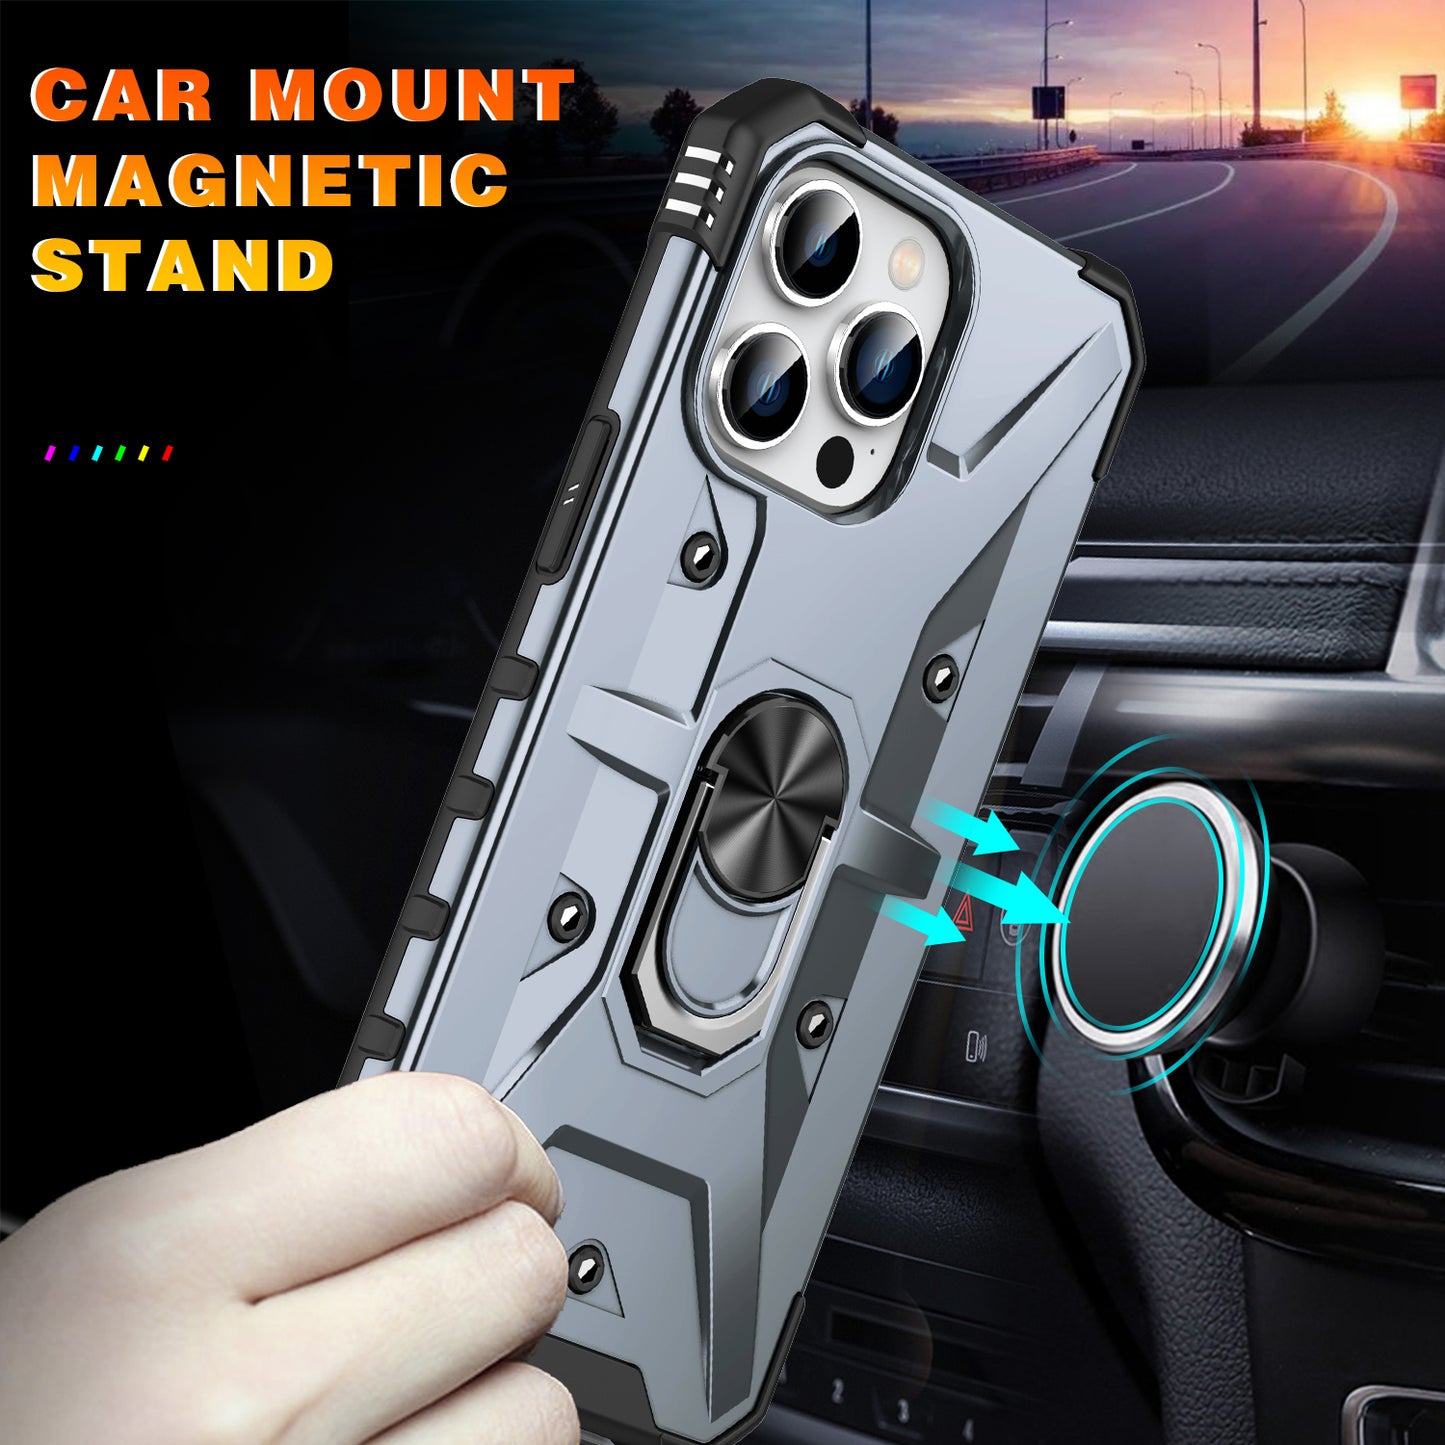 new product back cover for iphone 11 pro max with holder ring shockproof drop armor phone case for iphone 11 airbag case